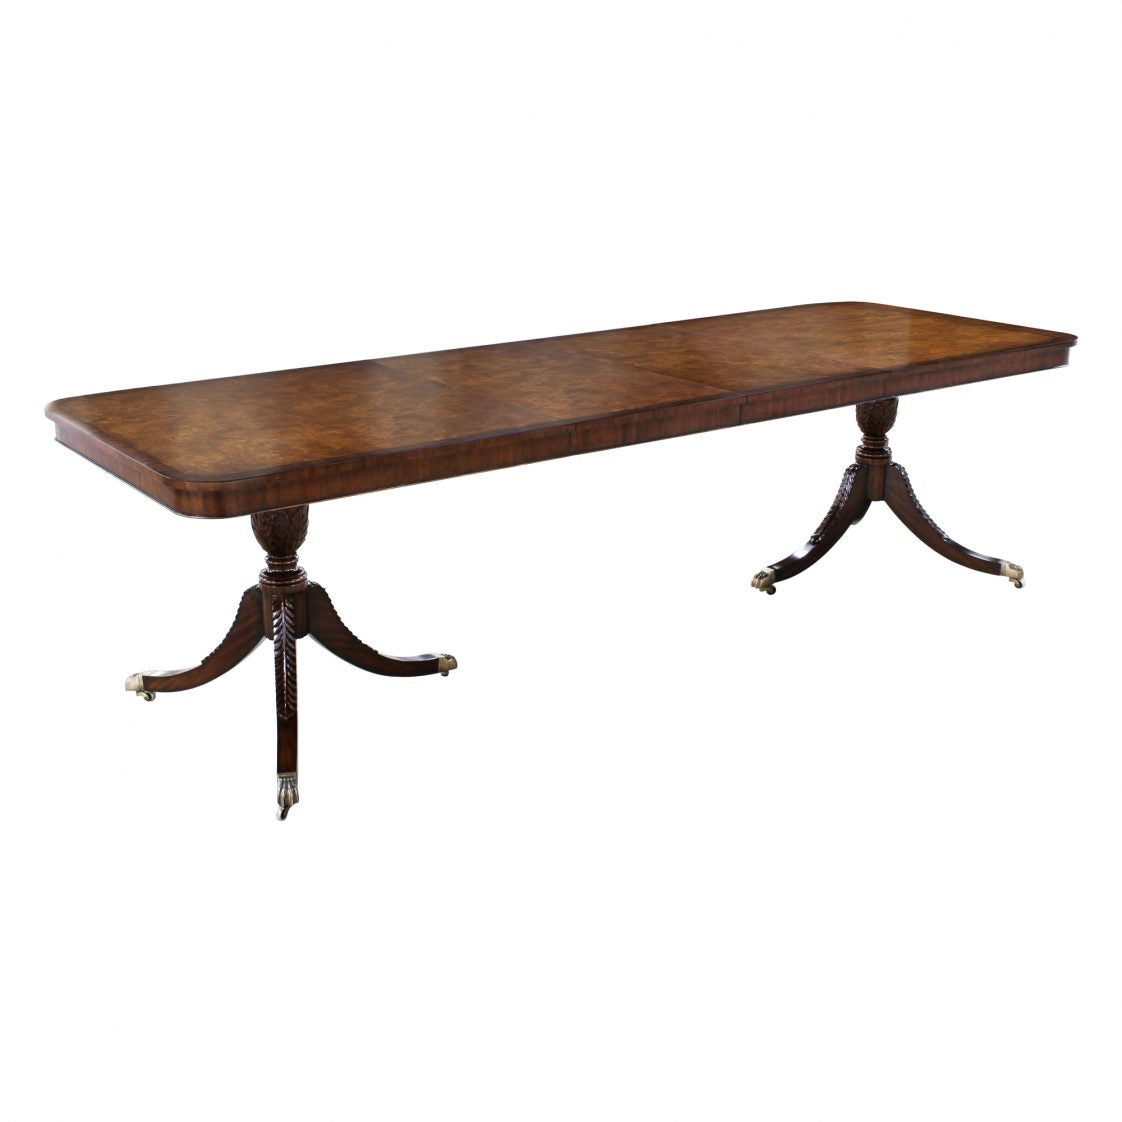 Two Pedestal Mahogany and Walnut Burl Dining Table